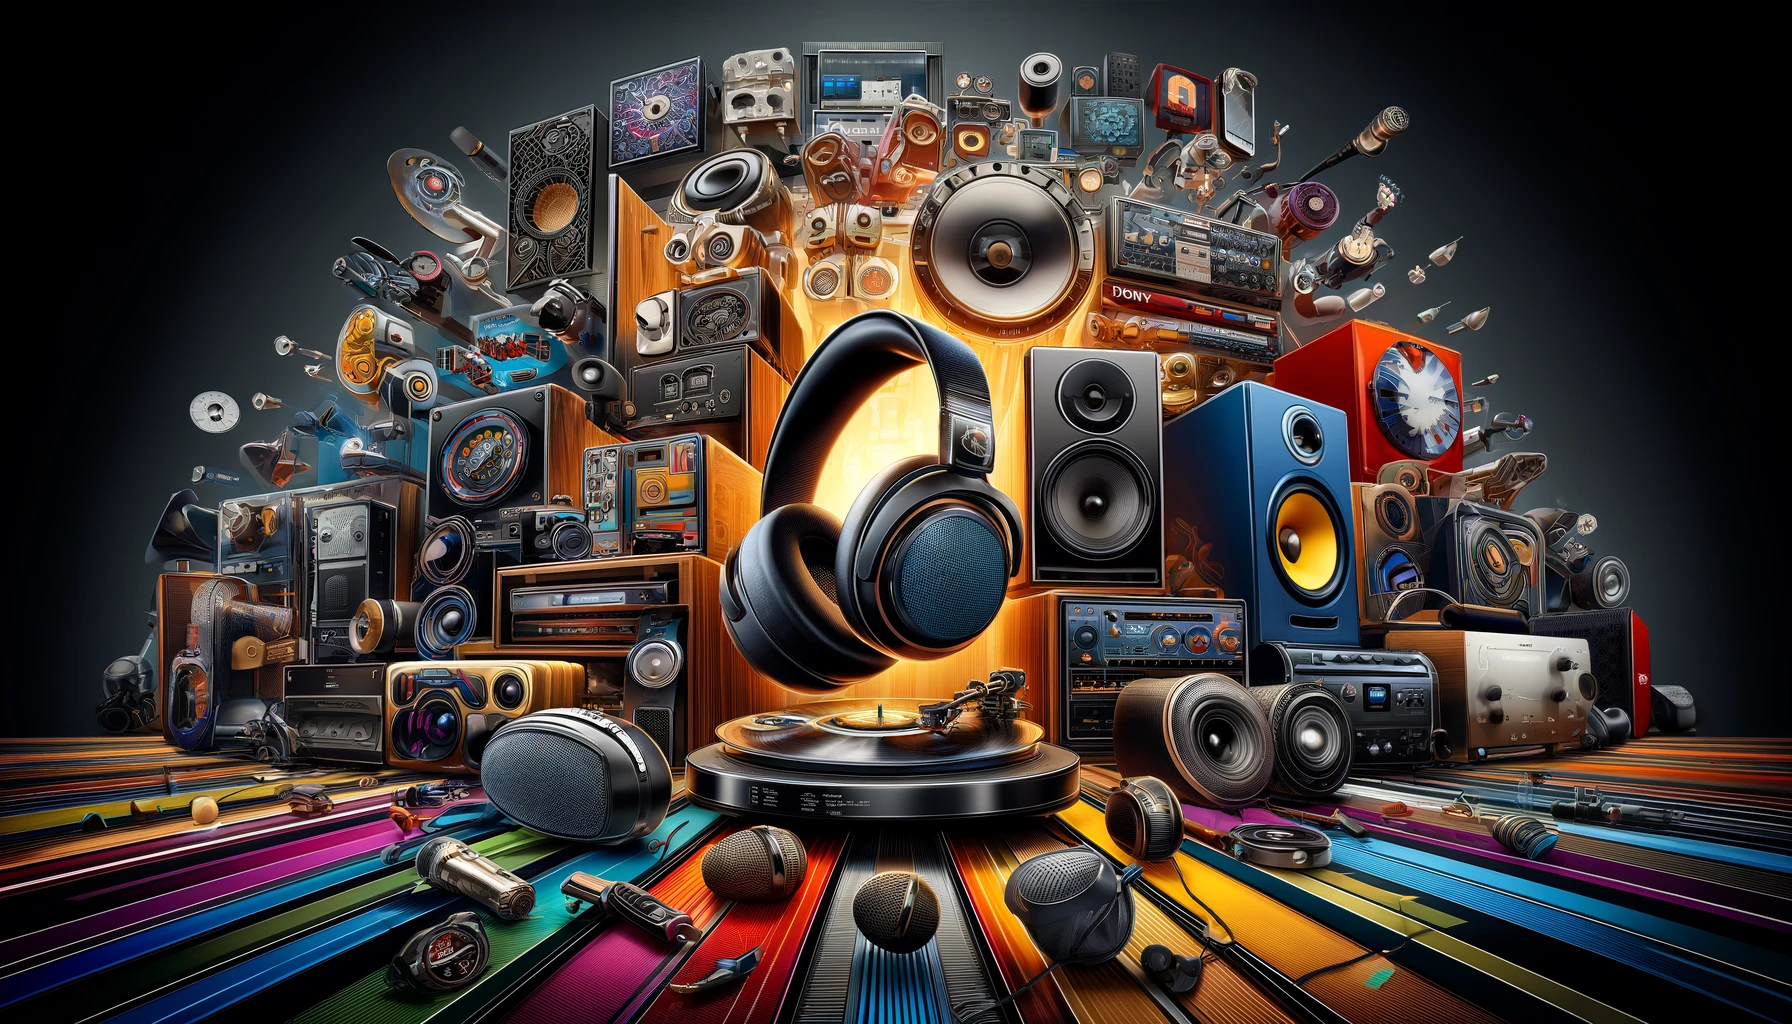 A digital collage featuring an array of premium audio equipment from brands like Bose, Sennheiser, and Sony, among others.